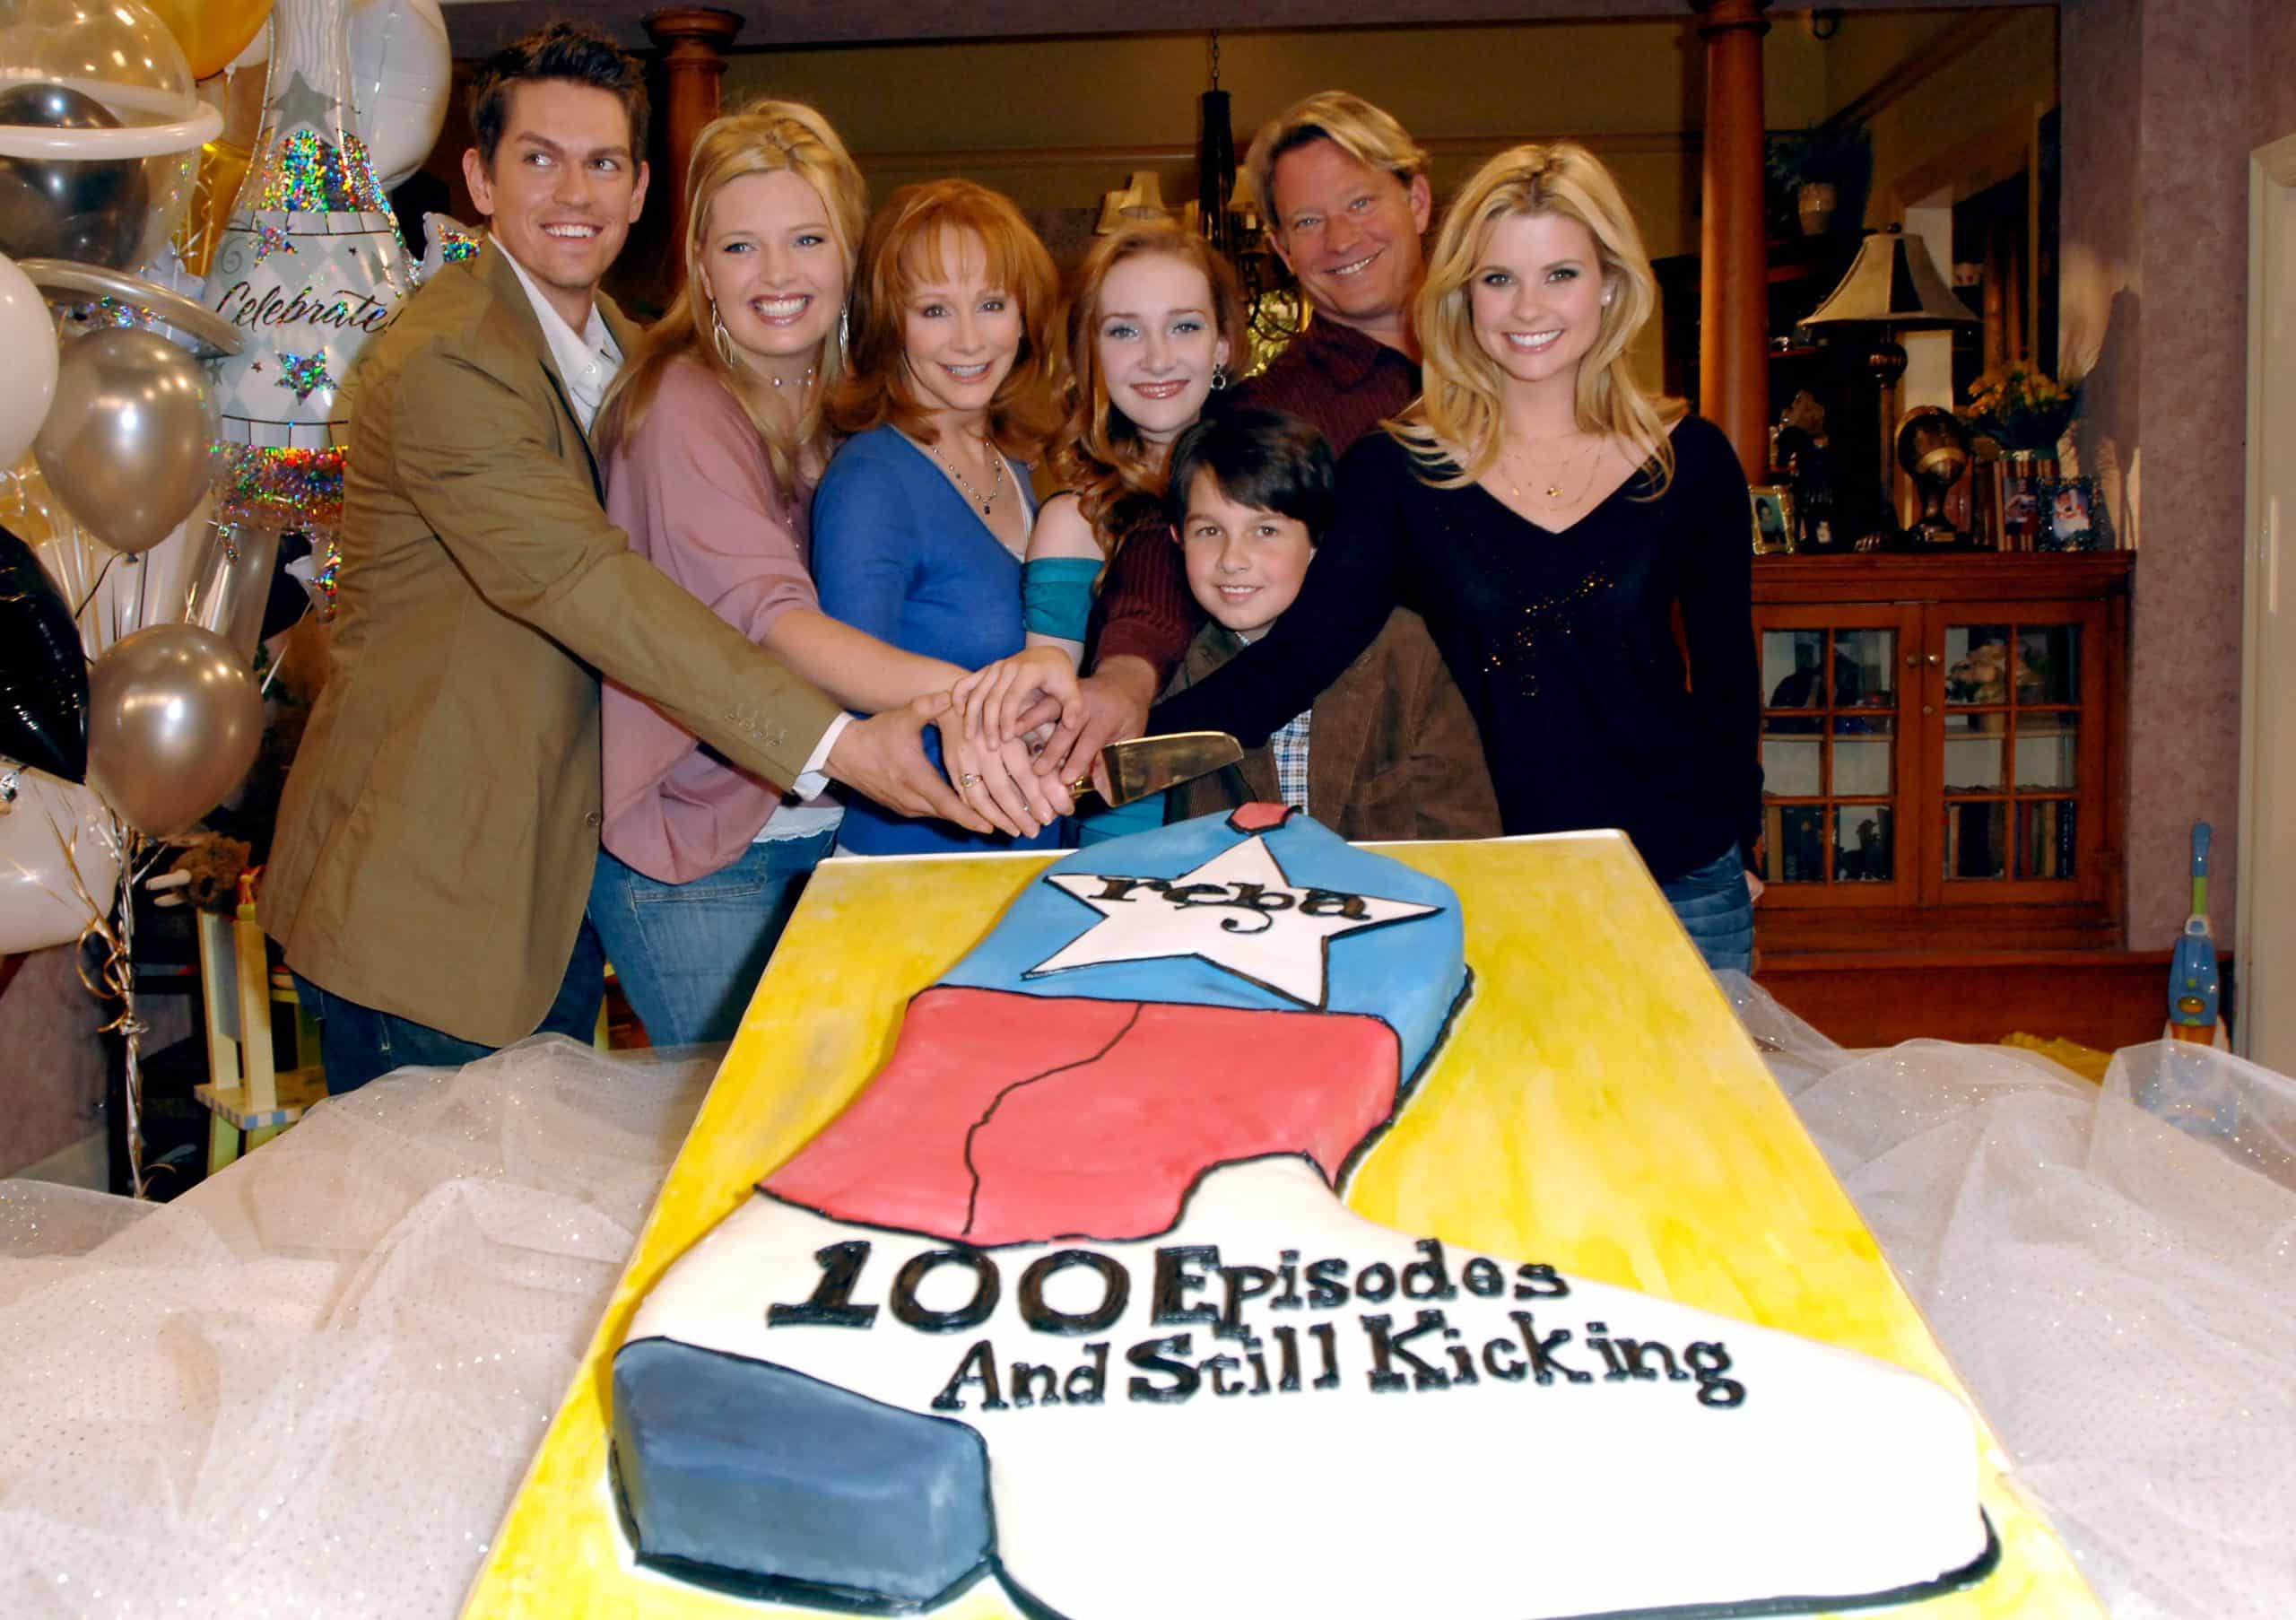 Reba McEntire set to star in new sitcom over 20 years after her previous namesake show, "Reba," debuted. Here, she is pictured with members of the cast celebrating their 100th episode.